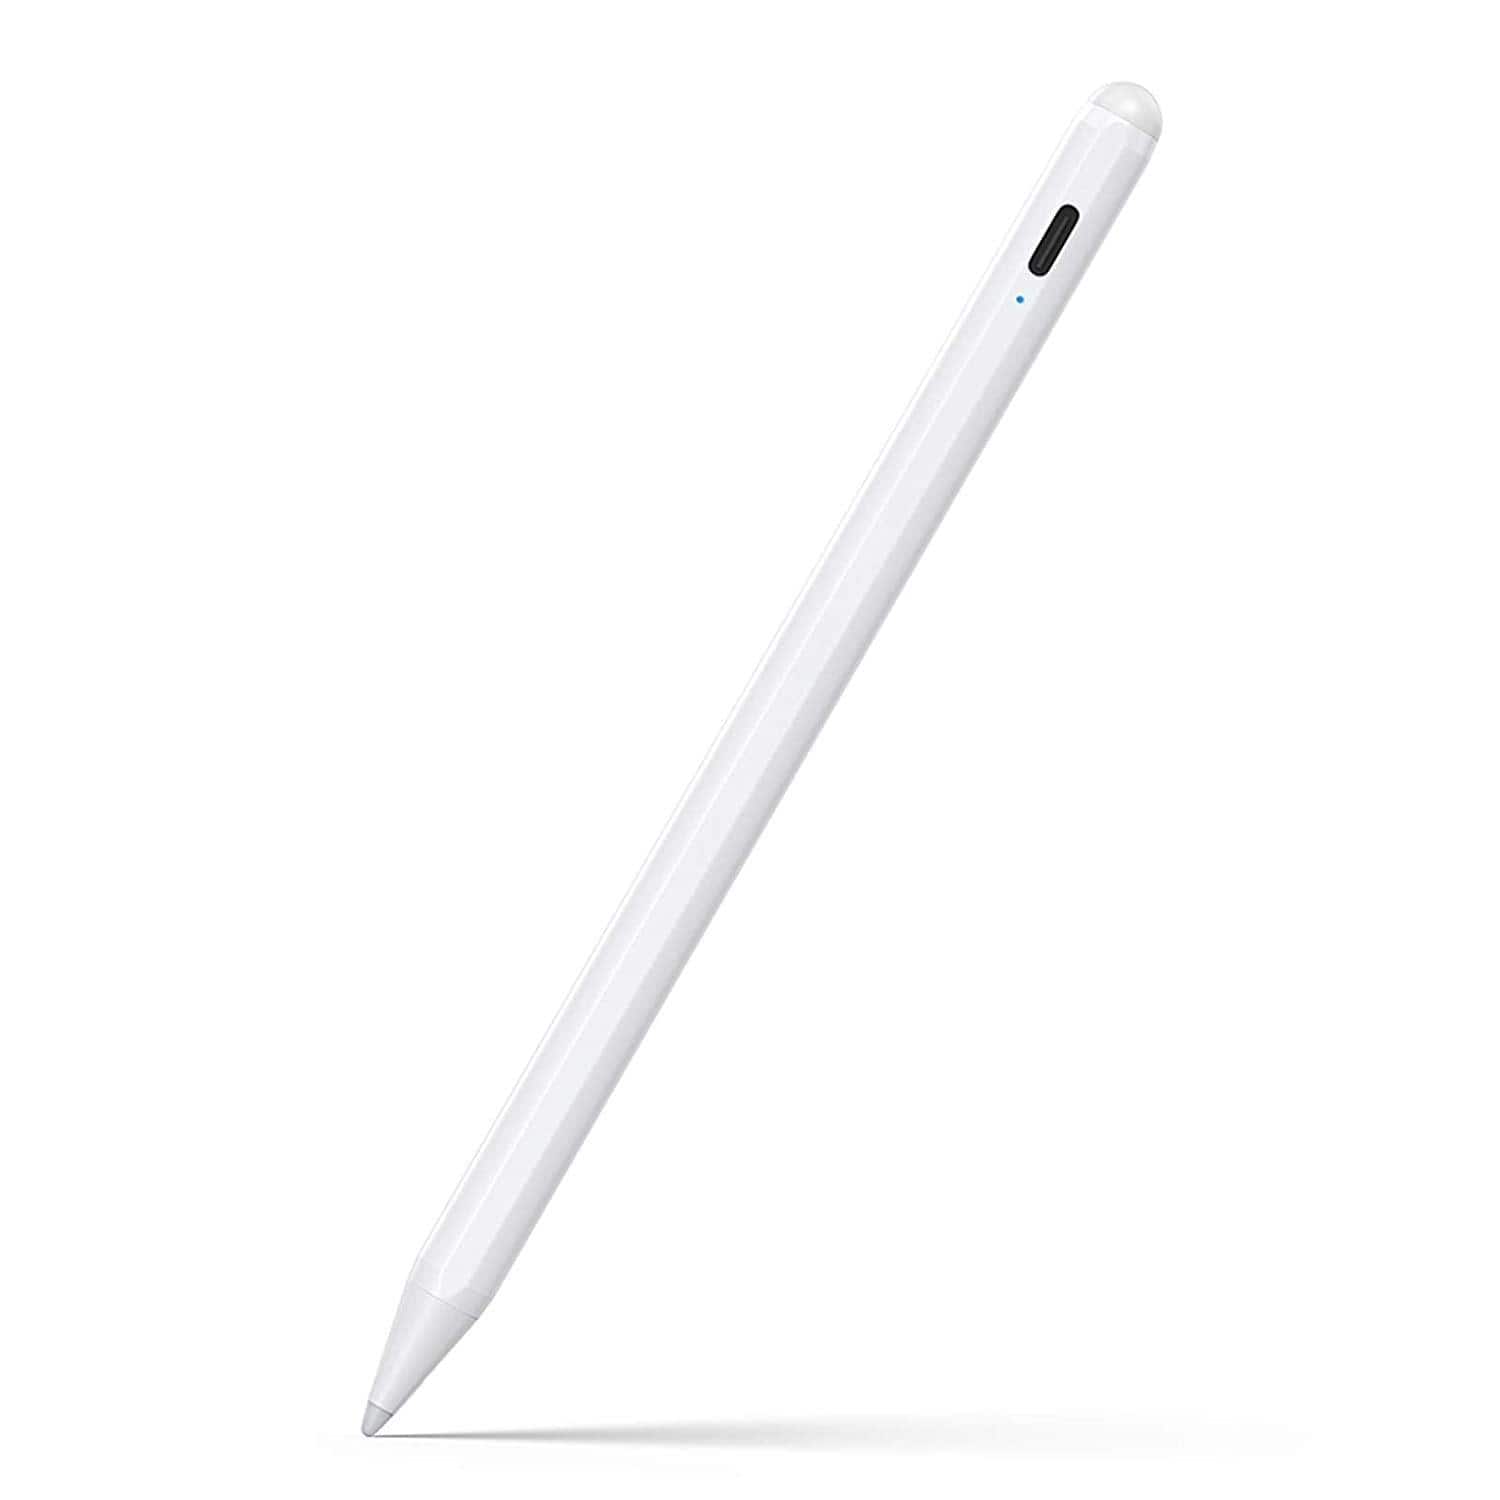 TOTU Active Stylus Pen for any iPad, iPad Pro, iPad Mini, iPad Air with Palm Rejection Active Pencil for Precise Writing/Drawing-Stylus-dealsplant